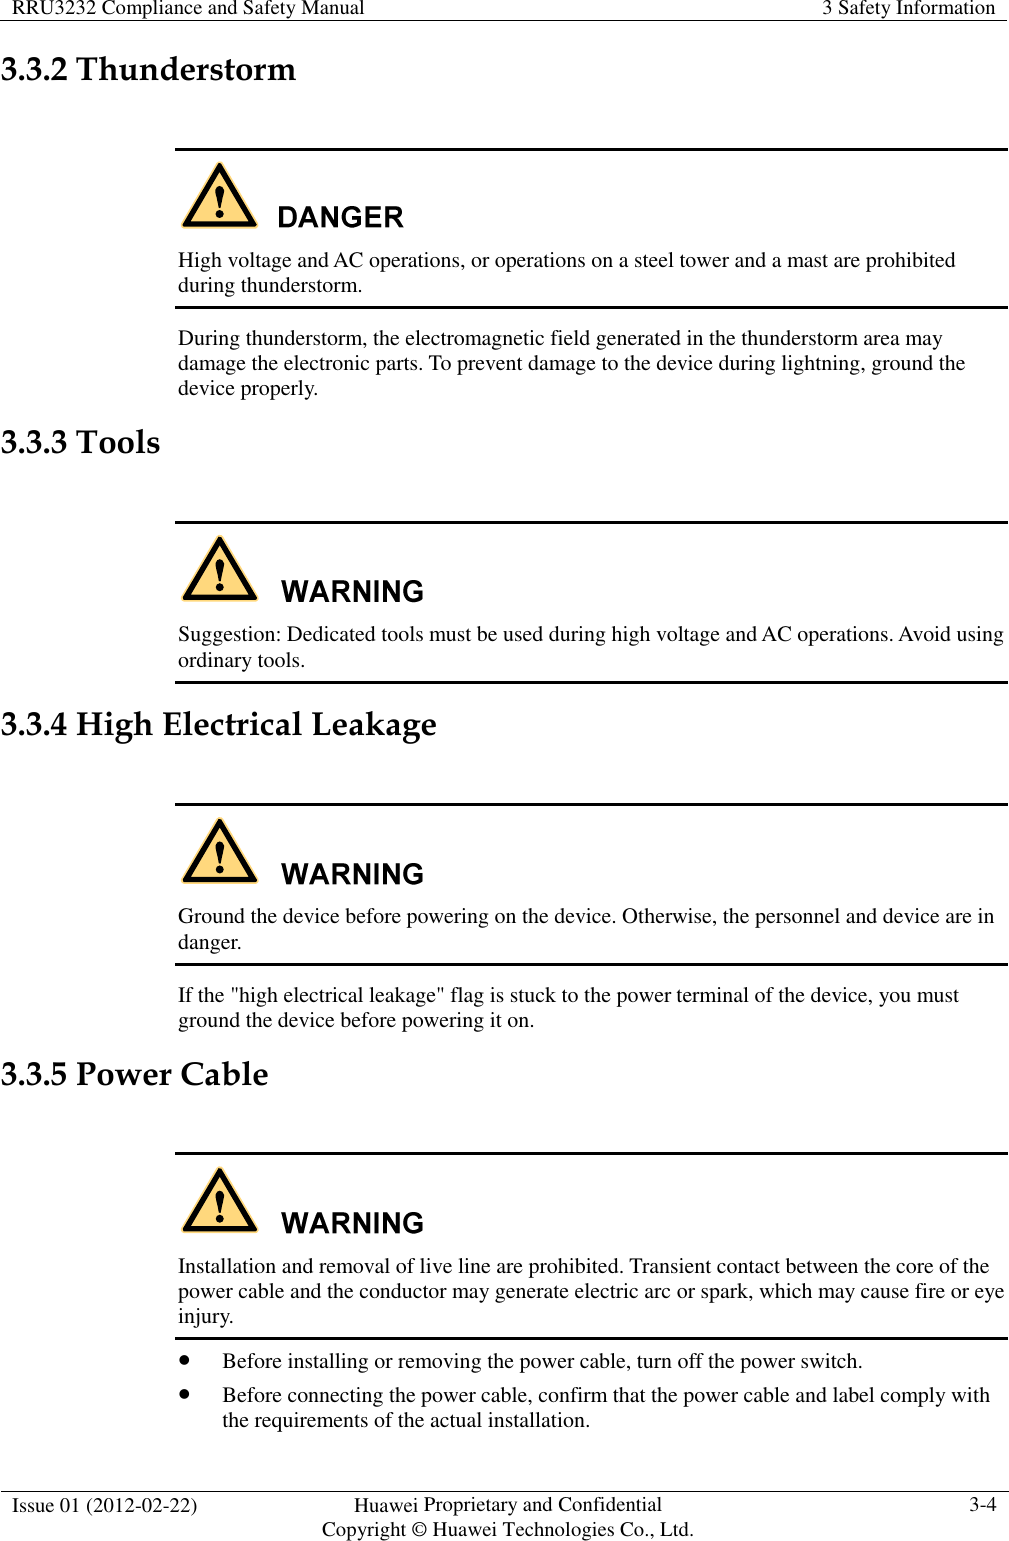 RRU3232 Compliance and Safety Manual  3 Safety Information  Issue 01 (2012-02-22)  Huawei Proprietary and Confidential           Copyright © Huawei Technologies Co., Ltd. 3-4  3.3.2 Thunderstorm   High voltage and AC operations, or operations on a steel tower and a mast are prohibited during thunderstorm. During thunderstorm, the electromagnetic field generated in the thunderstorm area may damage the electronic parts. To prevent damage to the device during lightning, ground the device properly. 3.3.3 Tools   Suggestion: Dedicated tools must be used during high voltage and AC operations. Avoid using ordinary tools. 3.3.4 High Electrical Leakage   Ground the device before powering on the device. Otherwise, the personnel and device are in danger. If the &quot;high electrical leakage&quot; flag is stuck to the power terminal of the device, you must ground the device before powering it on. 3.3.5 Power Cable   Installation and removal of live line are prohibited. Transient contact between the core of the power cable and the conductor may generate electric arc or spark, which may cause fire or eye injury.  Before installing or removing the power cable, turn off the power switch.  Before connecting the power cable, confirm that the power cable and label comply with the requirements of the actual installation. 